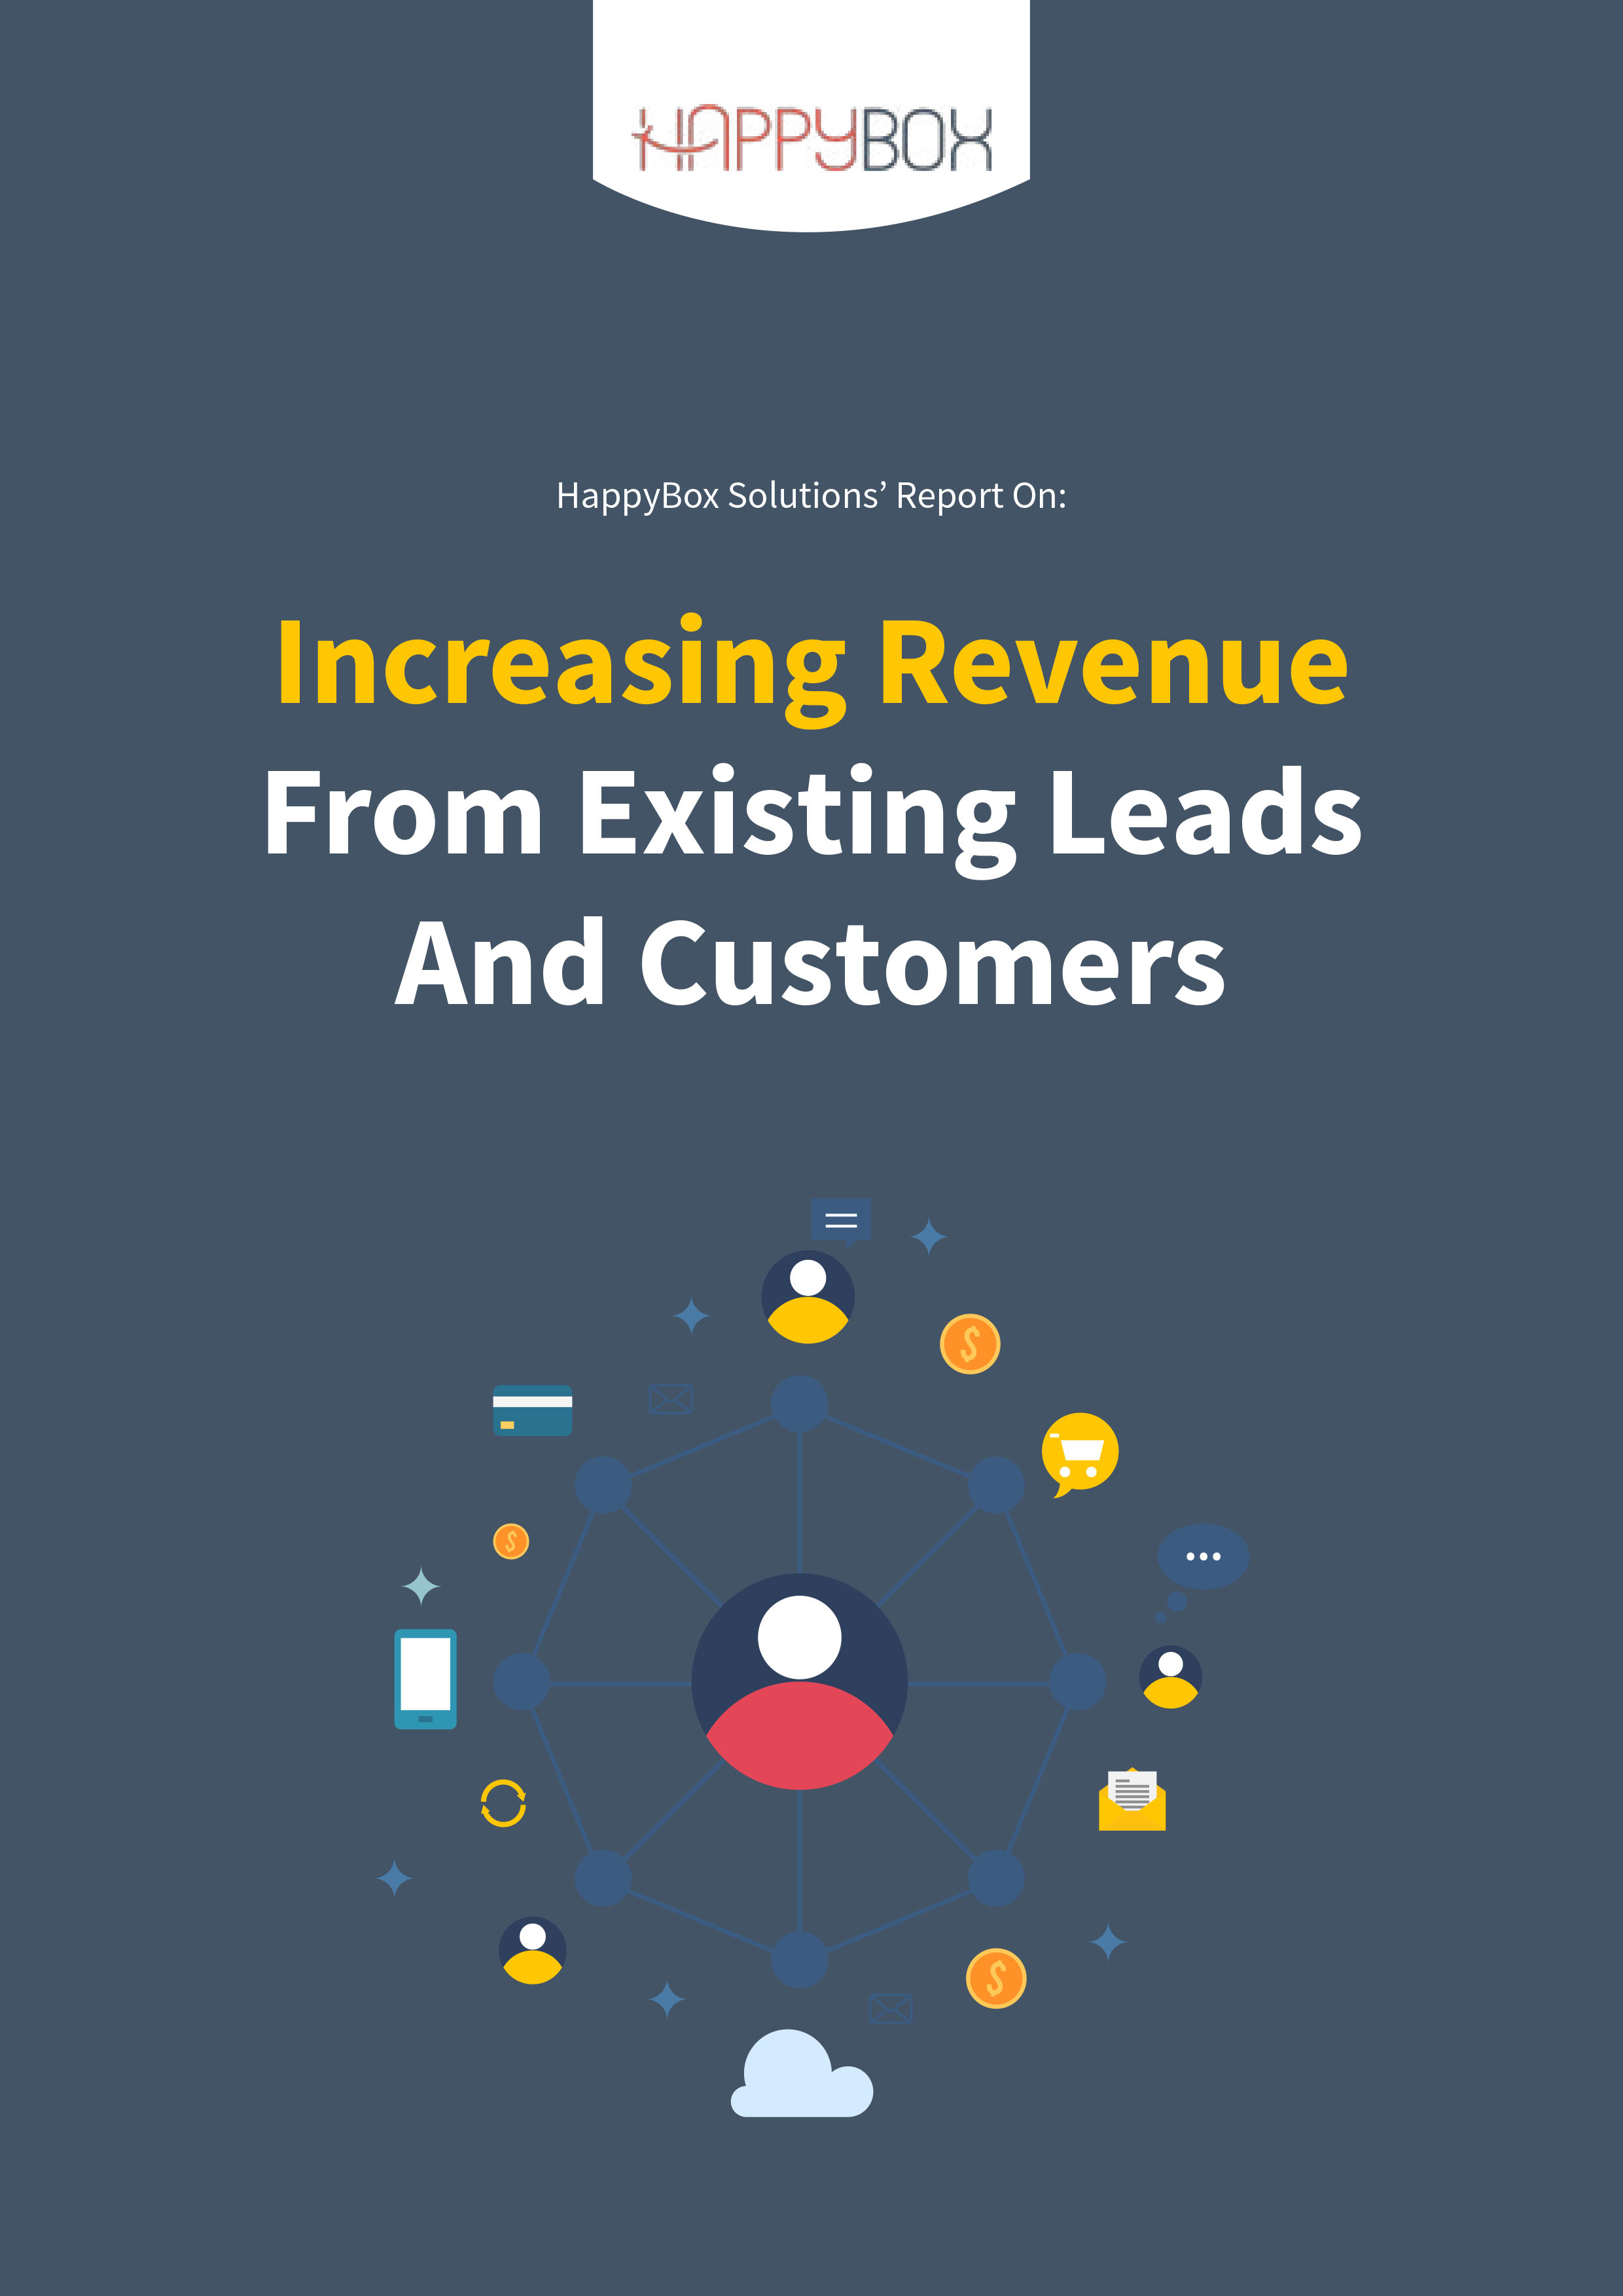 Increasing Revenue From Existing Leads And Customers – Happy Box Solutions